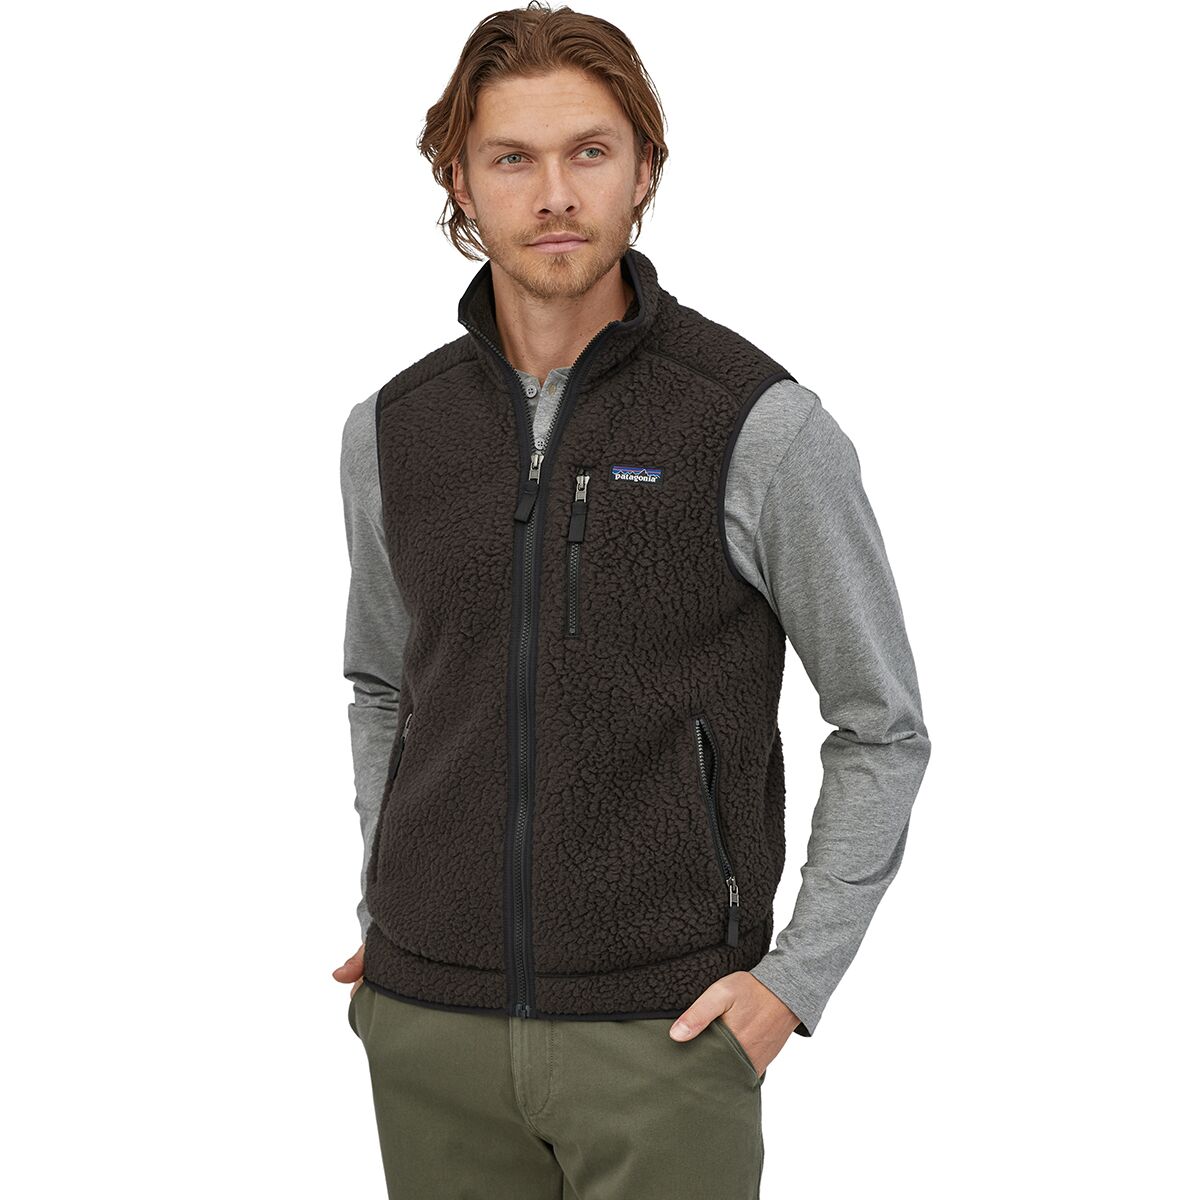 Patagonia retro vest mens forex is a scam or